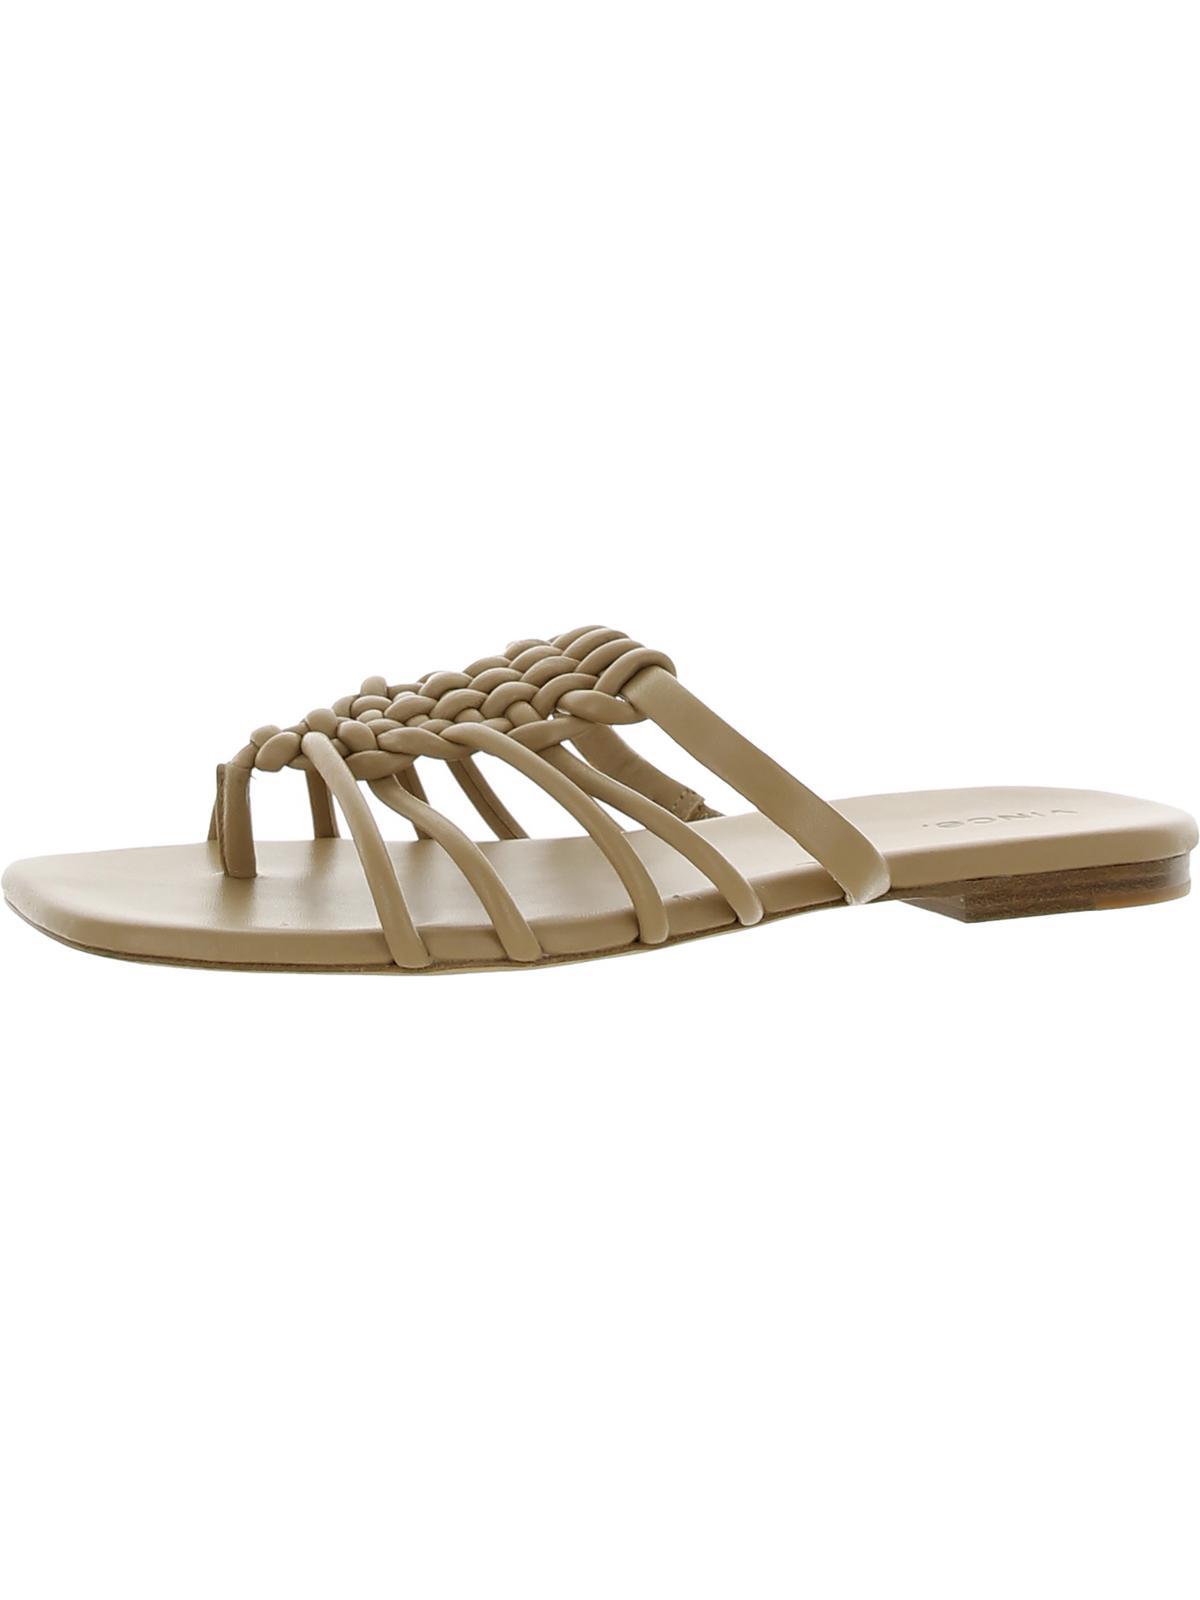 Vince Dae Woven Leather Slide Sandals in Metallic | Lyst